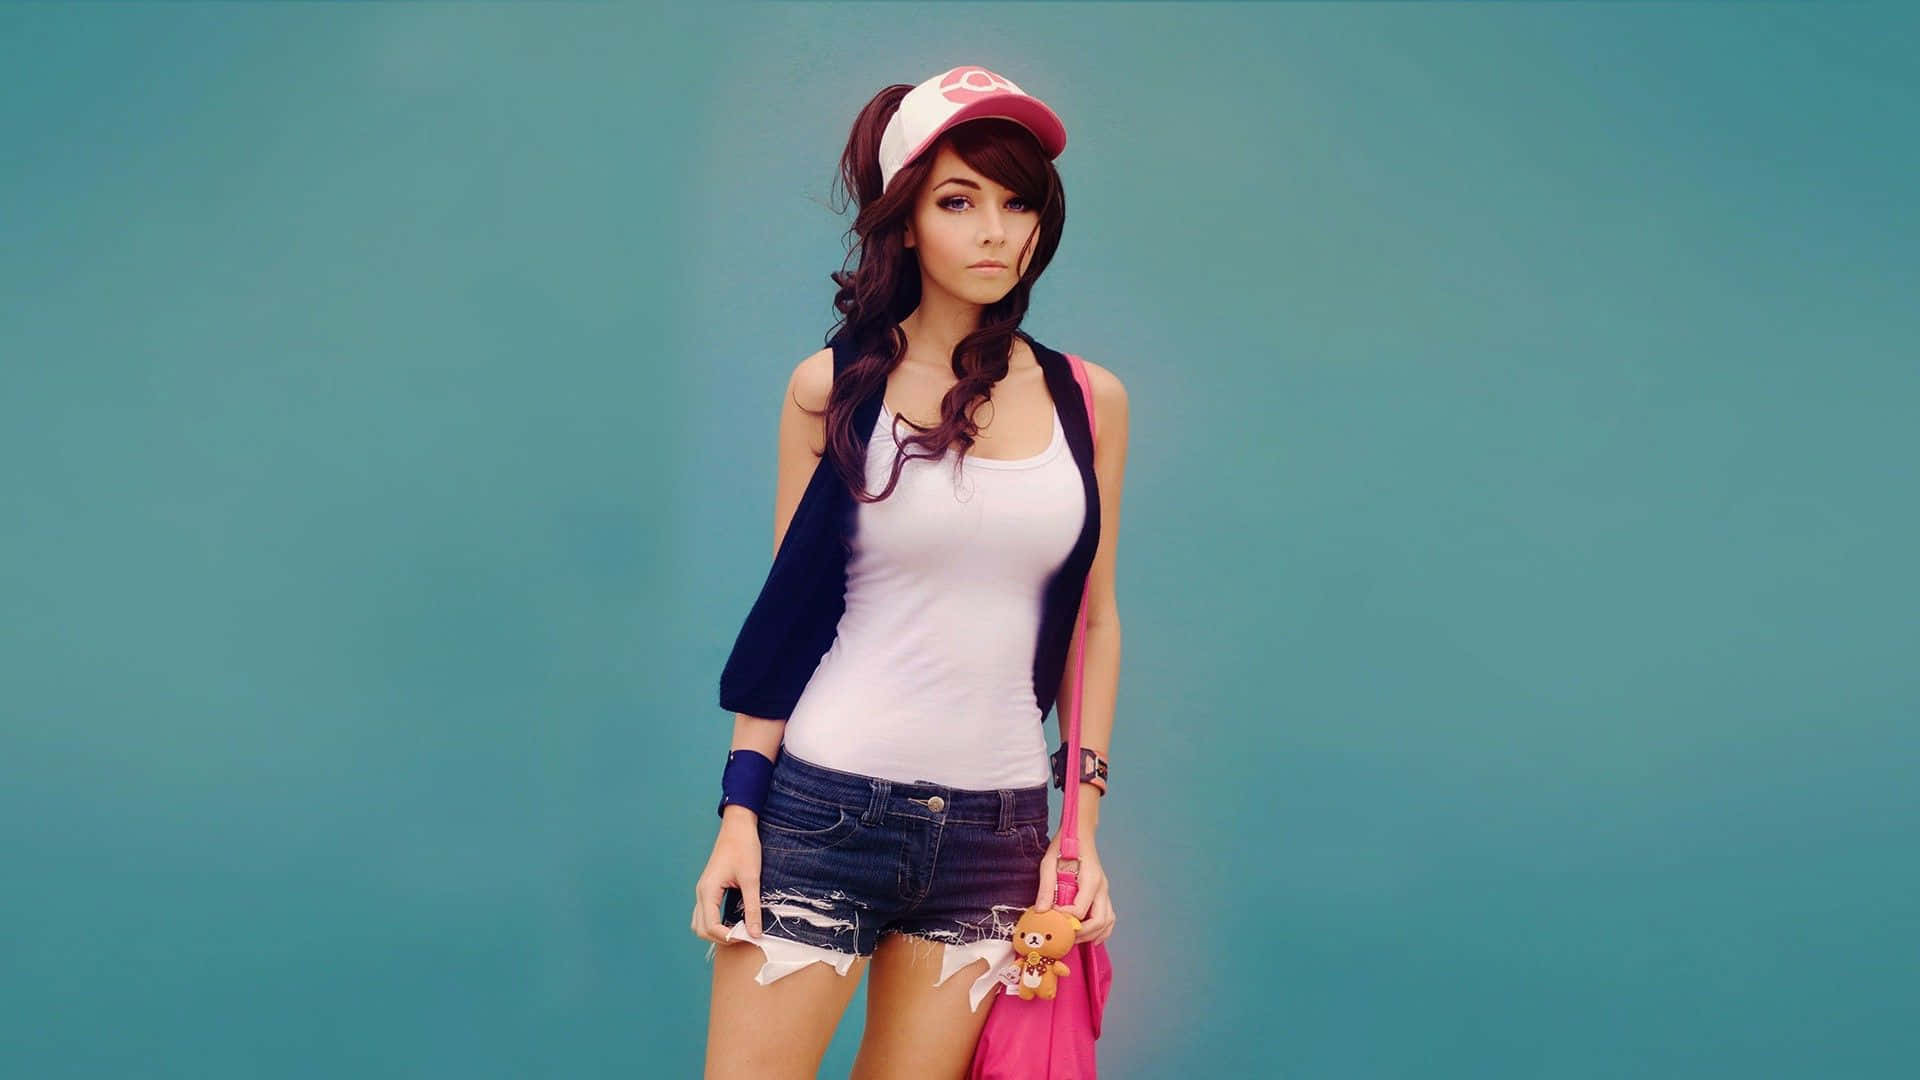 Cool Outfit Idea For Young Teenager Girl Wallpaper